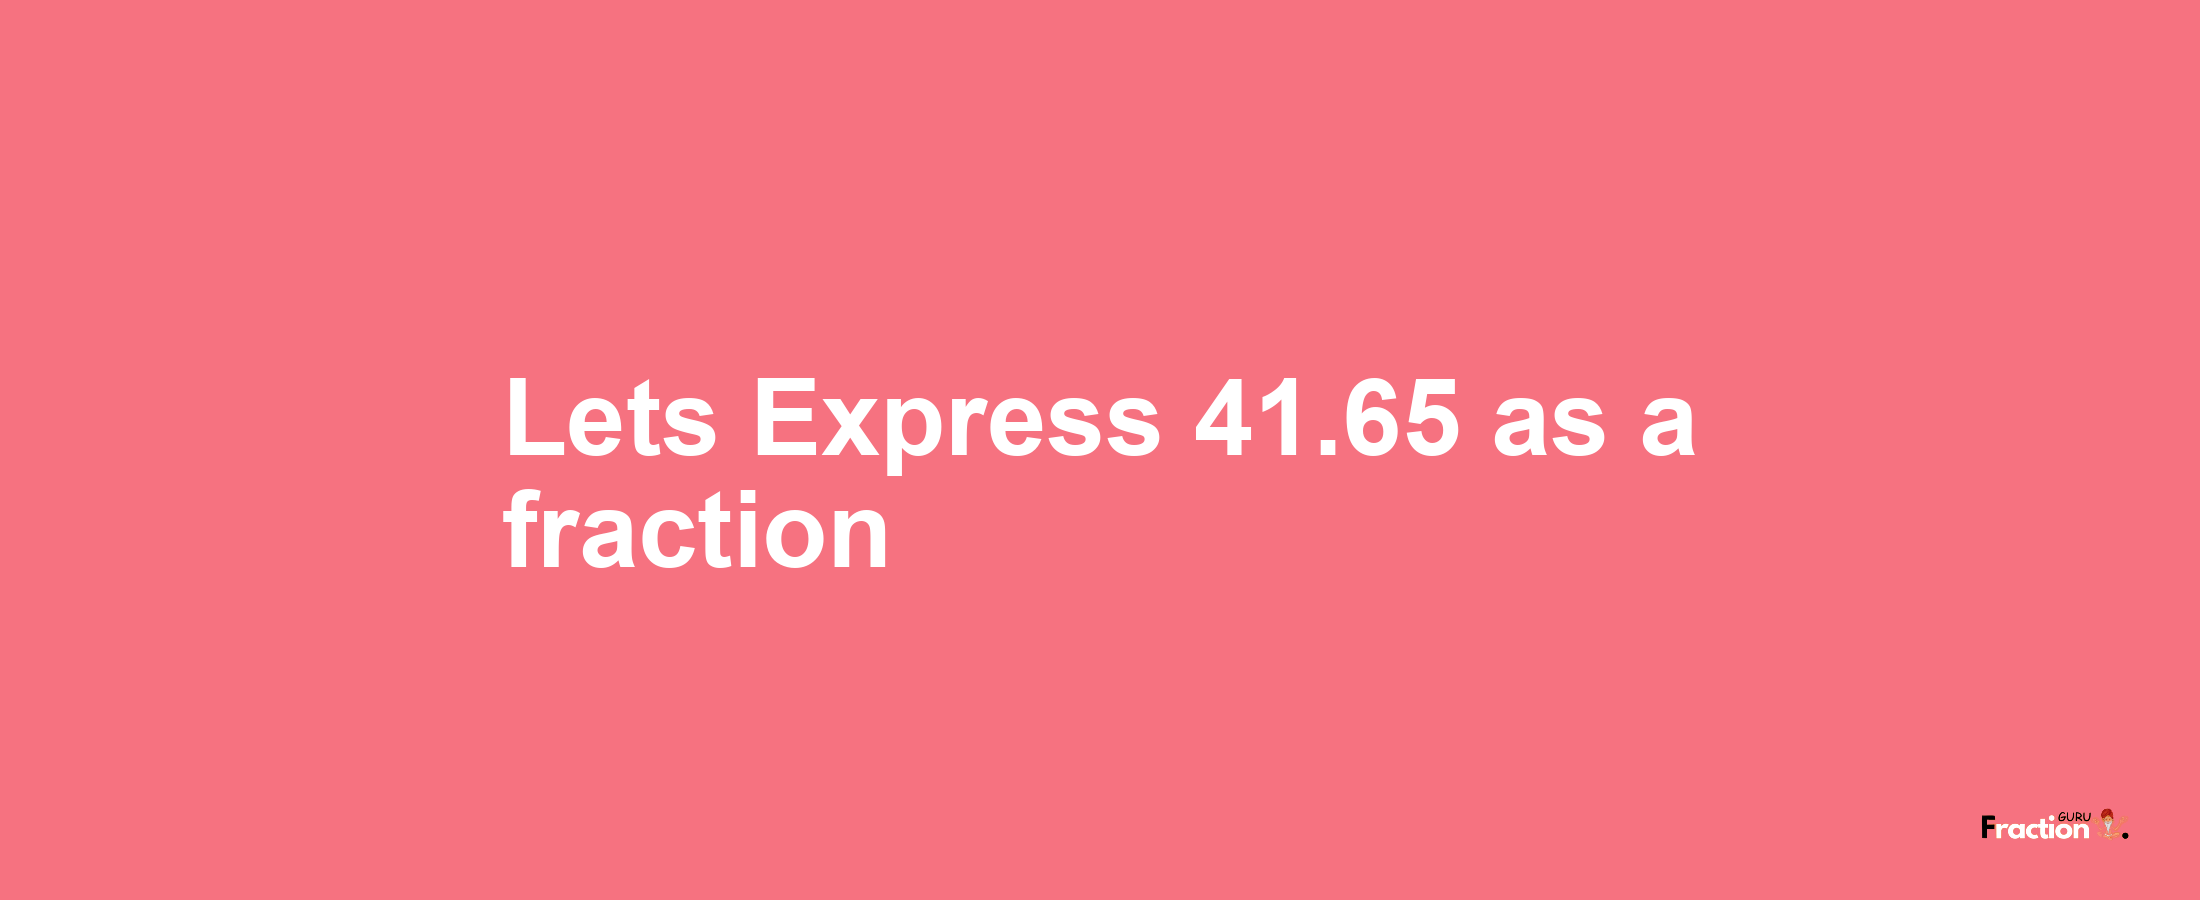 Lets Express 41.65 as afraction